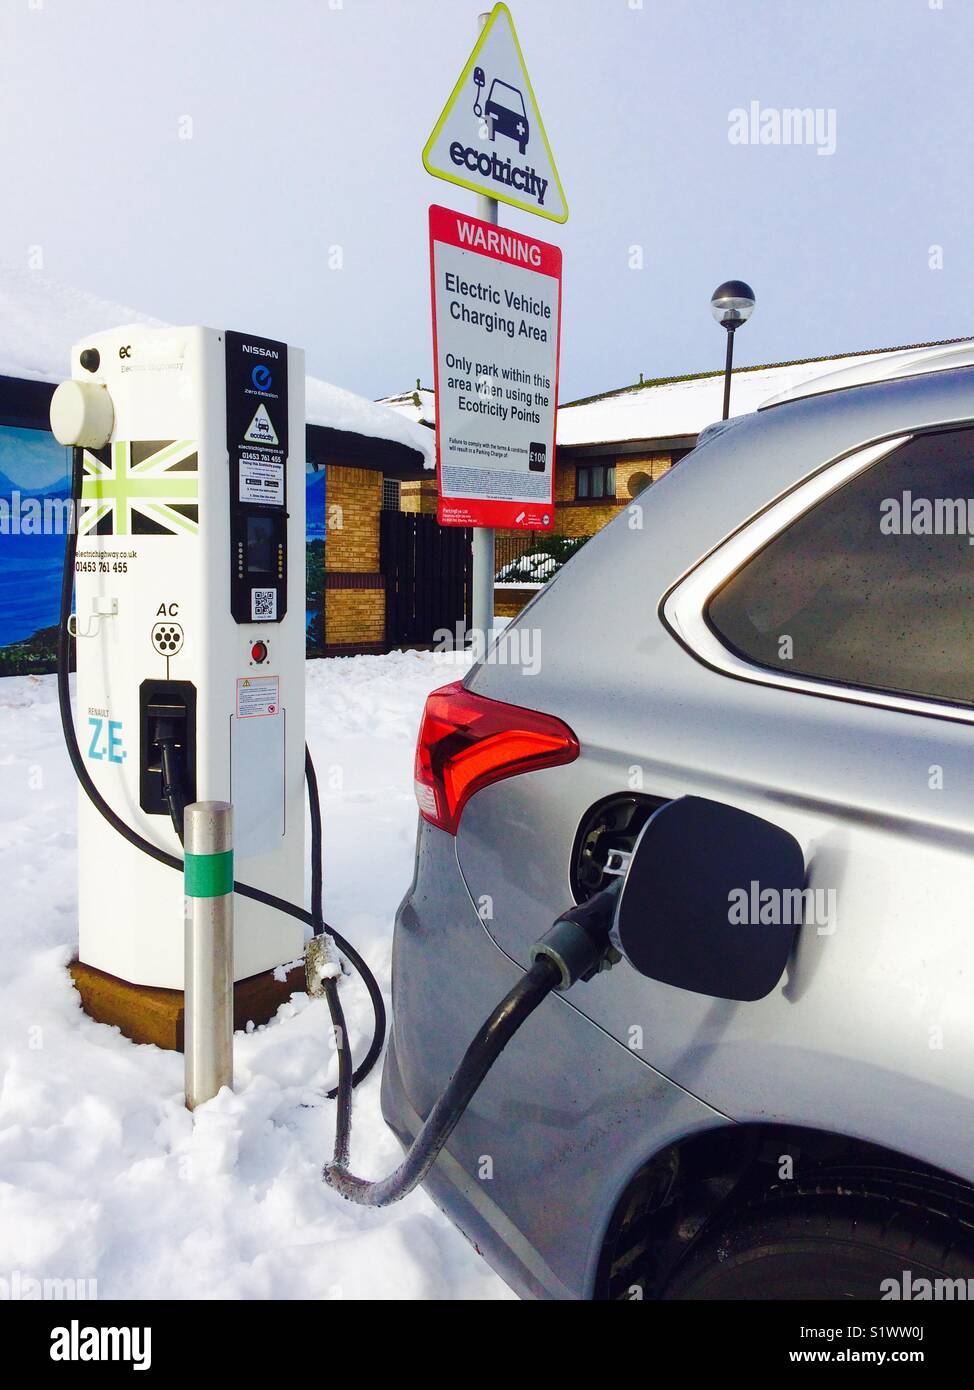 Plug in hybrid vehicle Mitsubishi Outlander PHEV connected to an Ecotricity EVCharging station by a CHADeMO lead in the snow Stock Photo